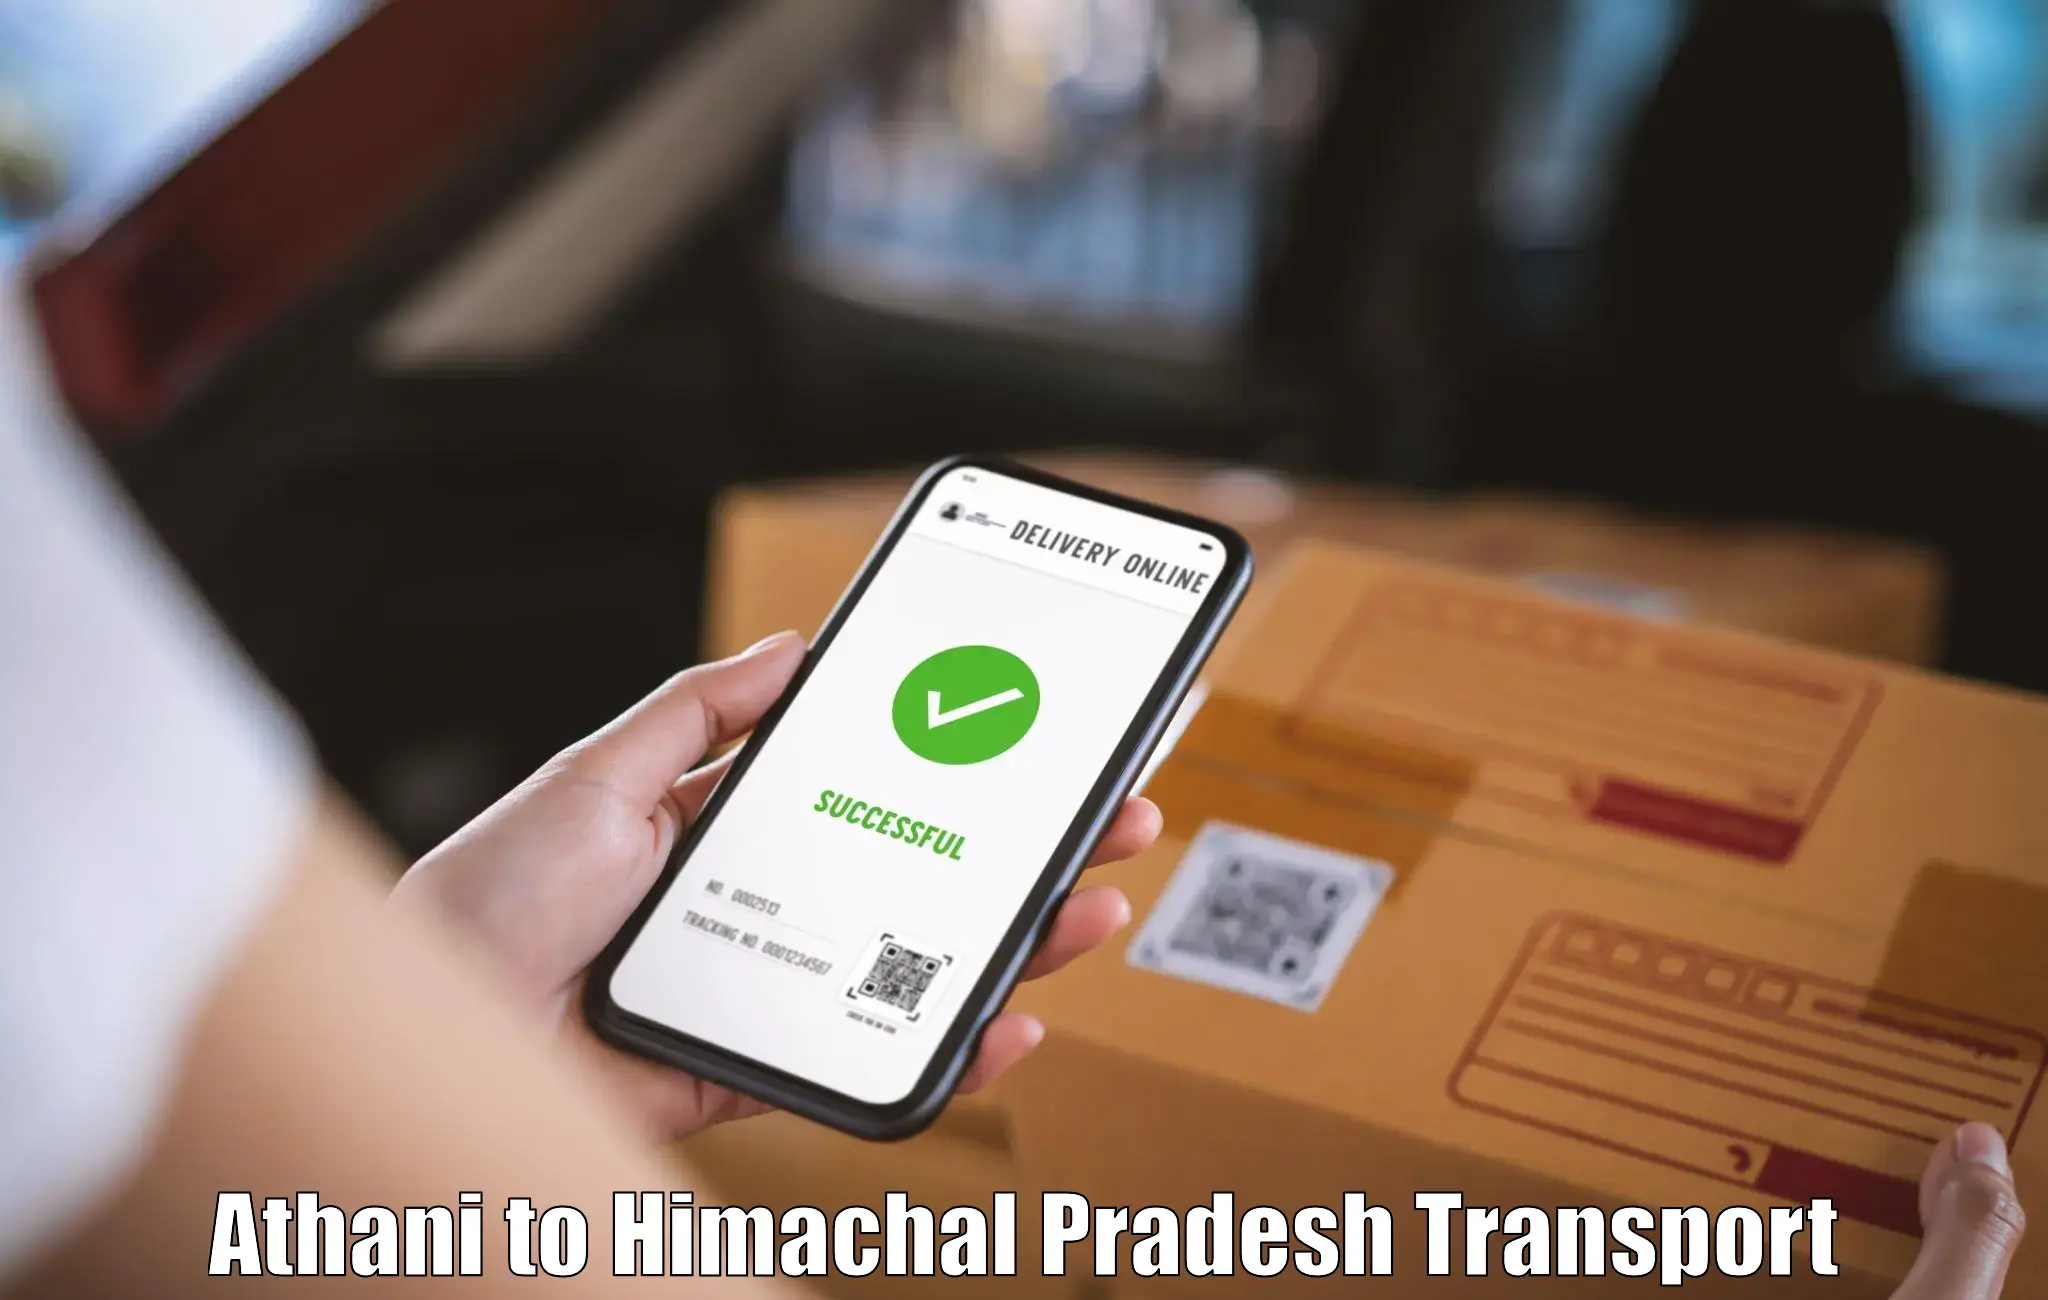 Nearby transport service Athani to Himachal Pradesh